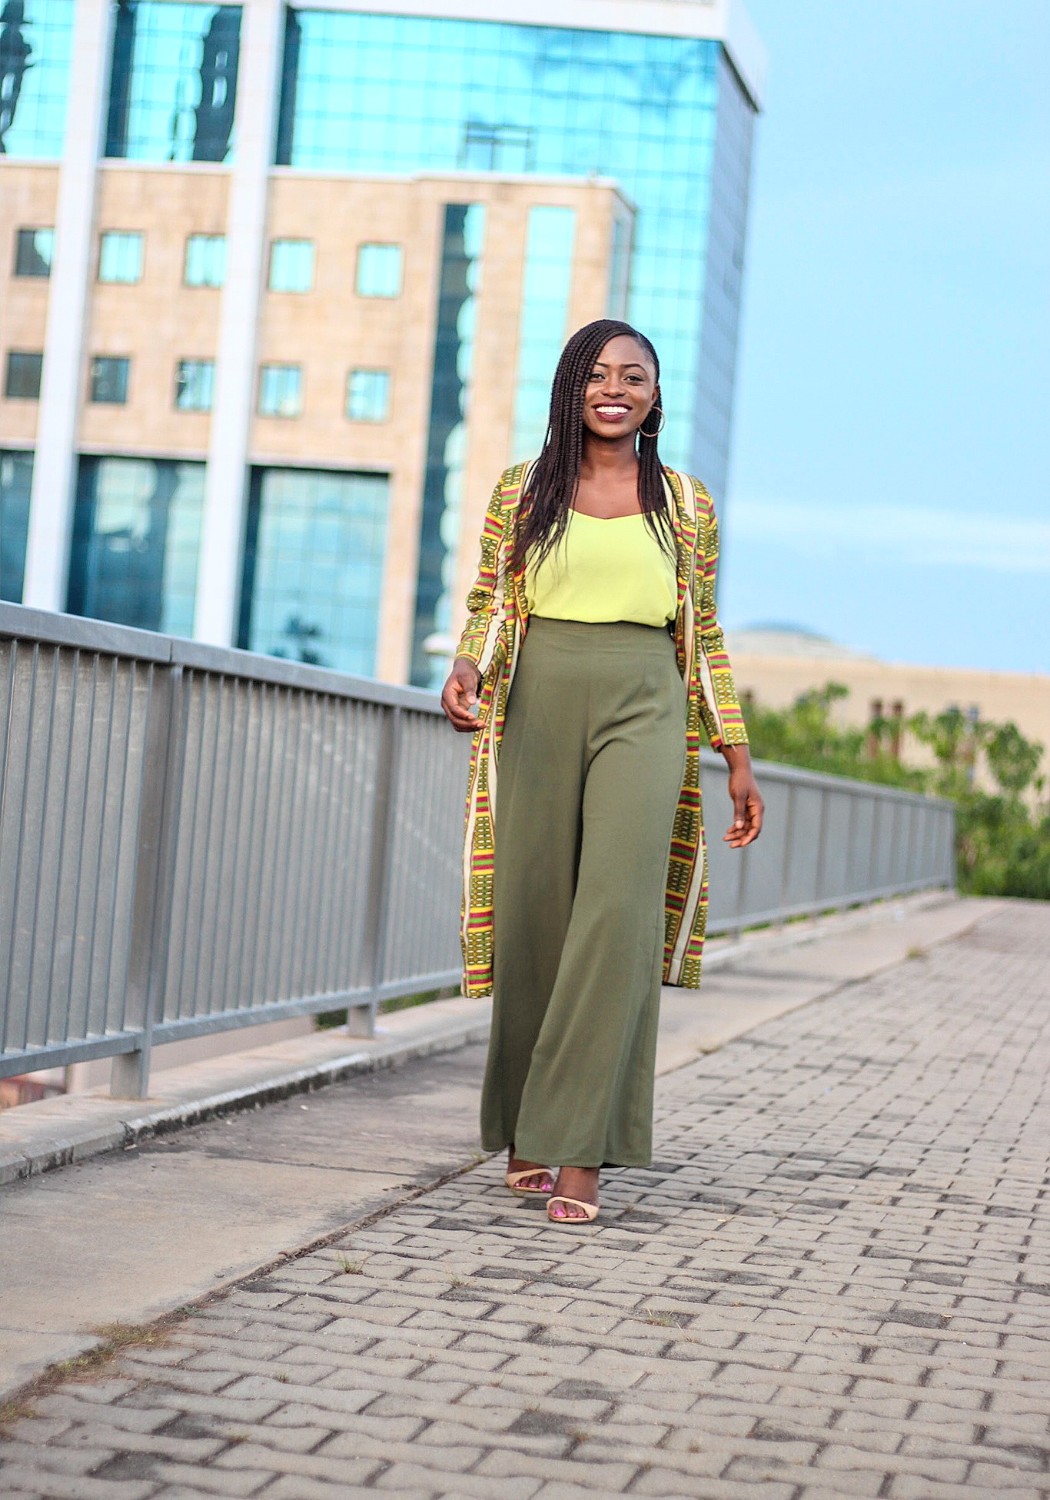 African print style and a kente print jacket